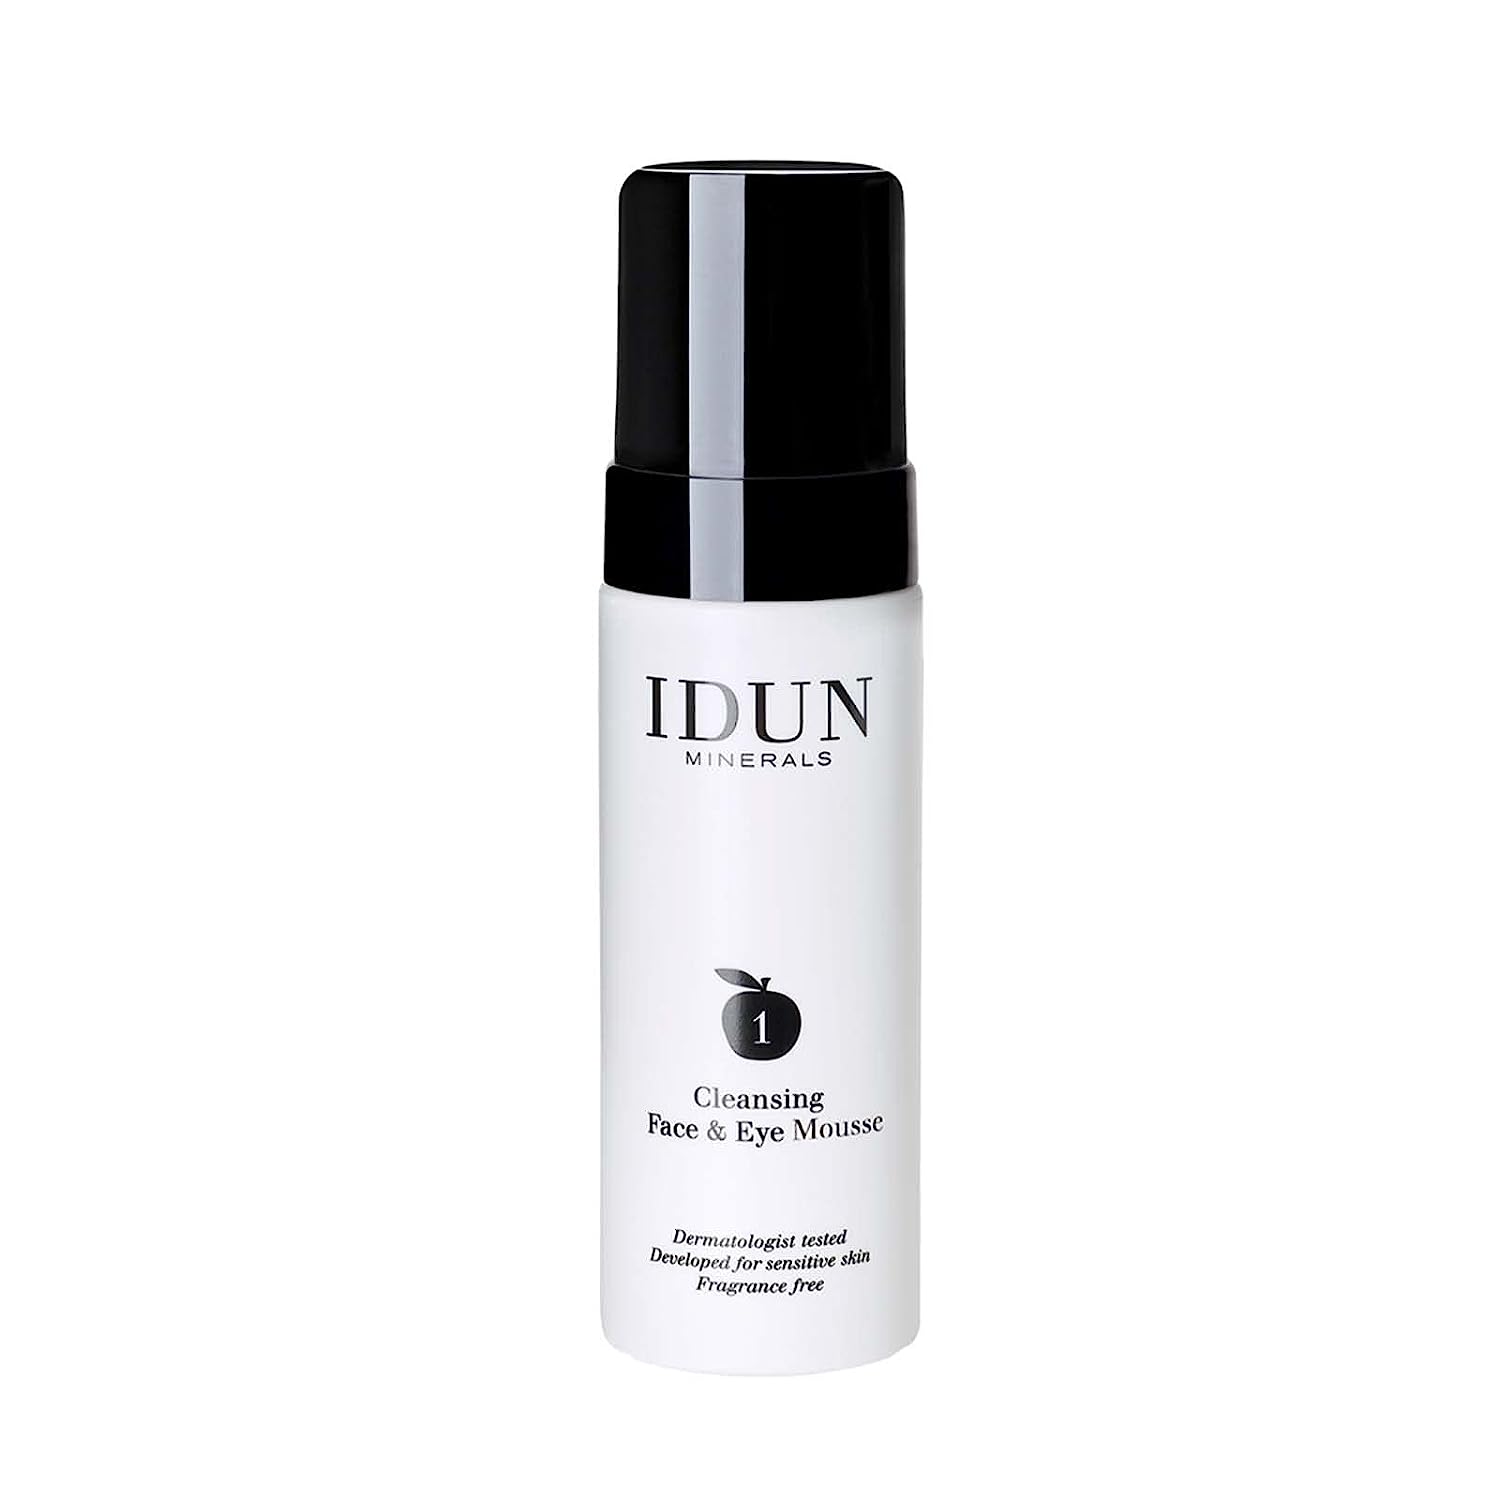 IDUN MINERALS - Cleansing Face and Eye Lotion - 150 ml